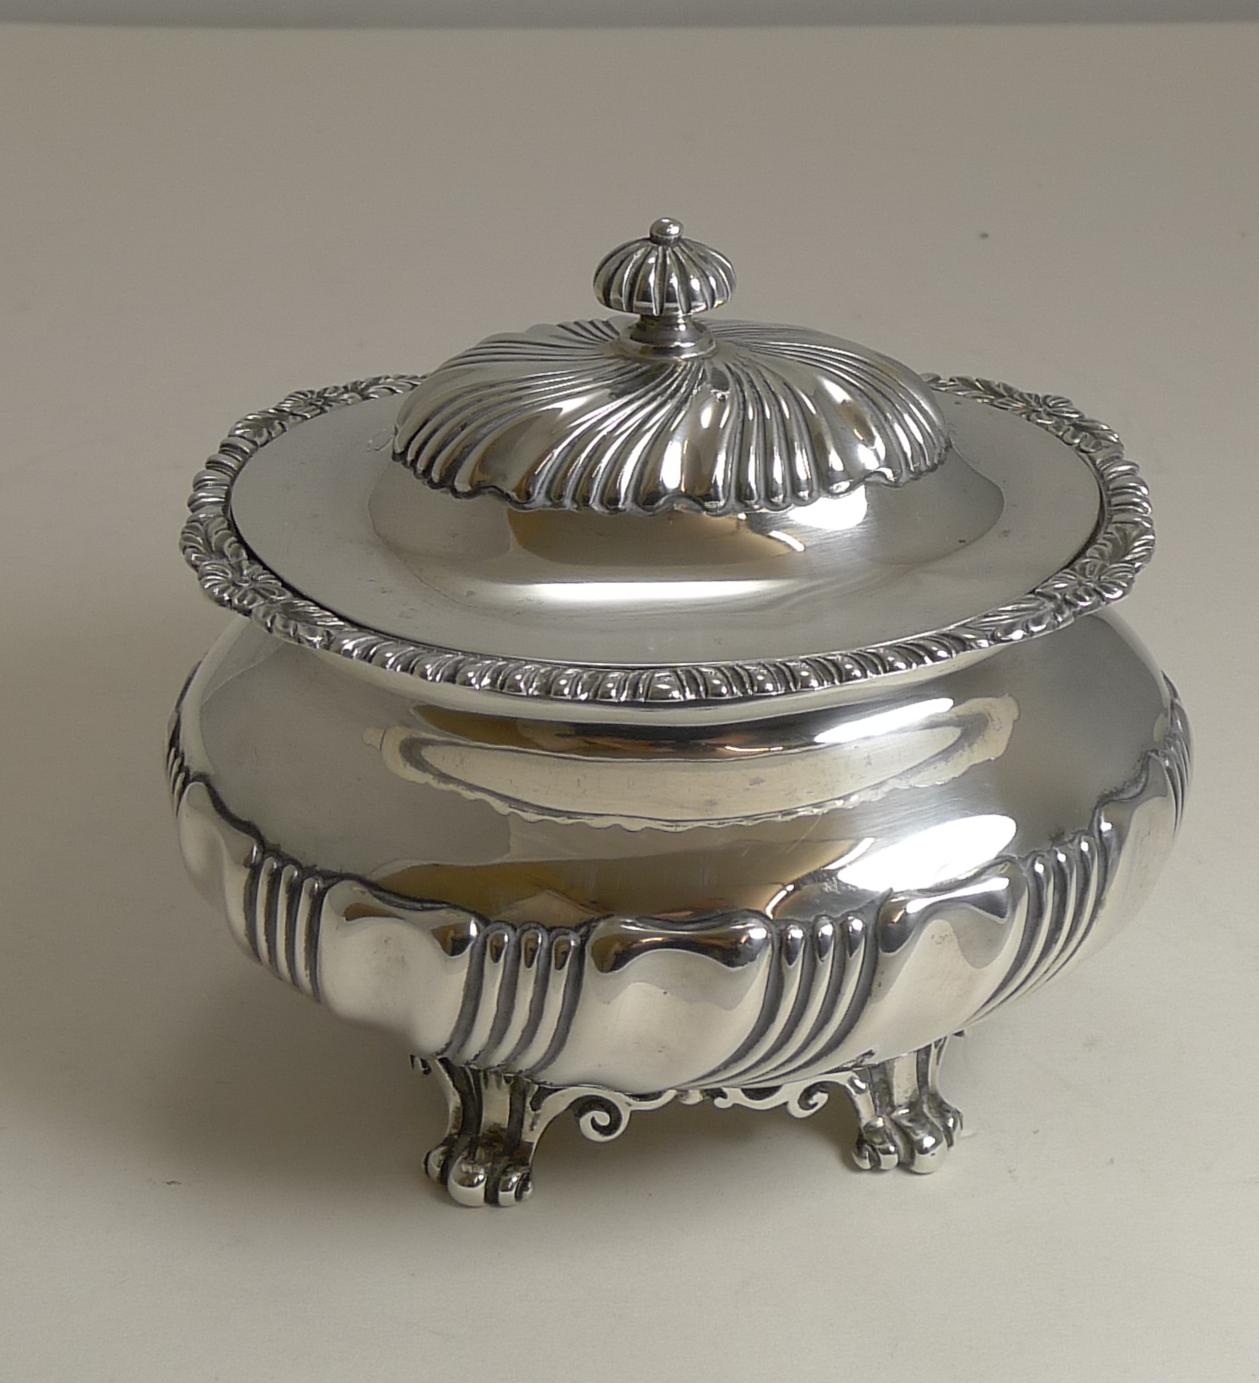 A stunning large and heavy tea caddy standing on pierced or reticulated cast base incorporating four feet, a fluted decoration to the body, hinged lid and finial; and an attractive cast border around the top of the caddy.

The silver is fully